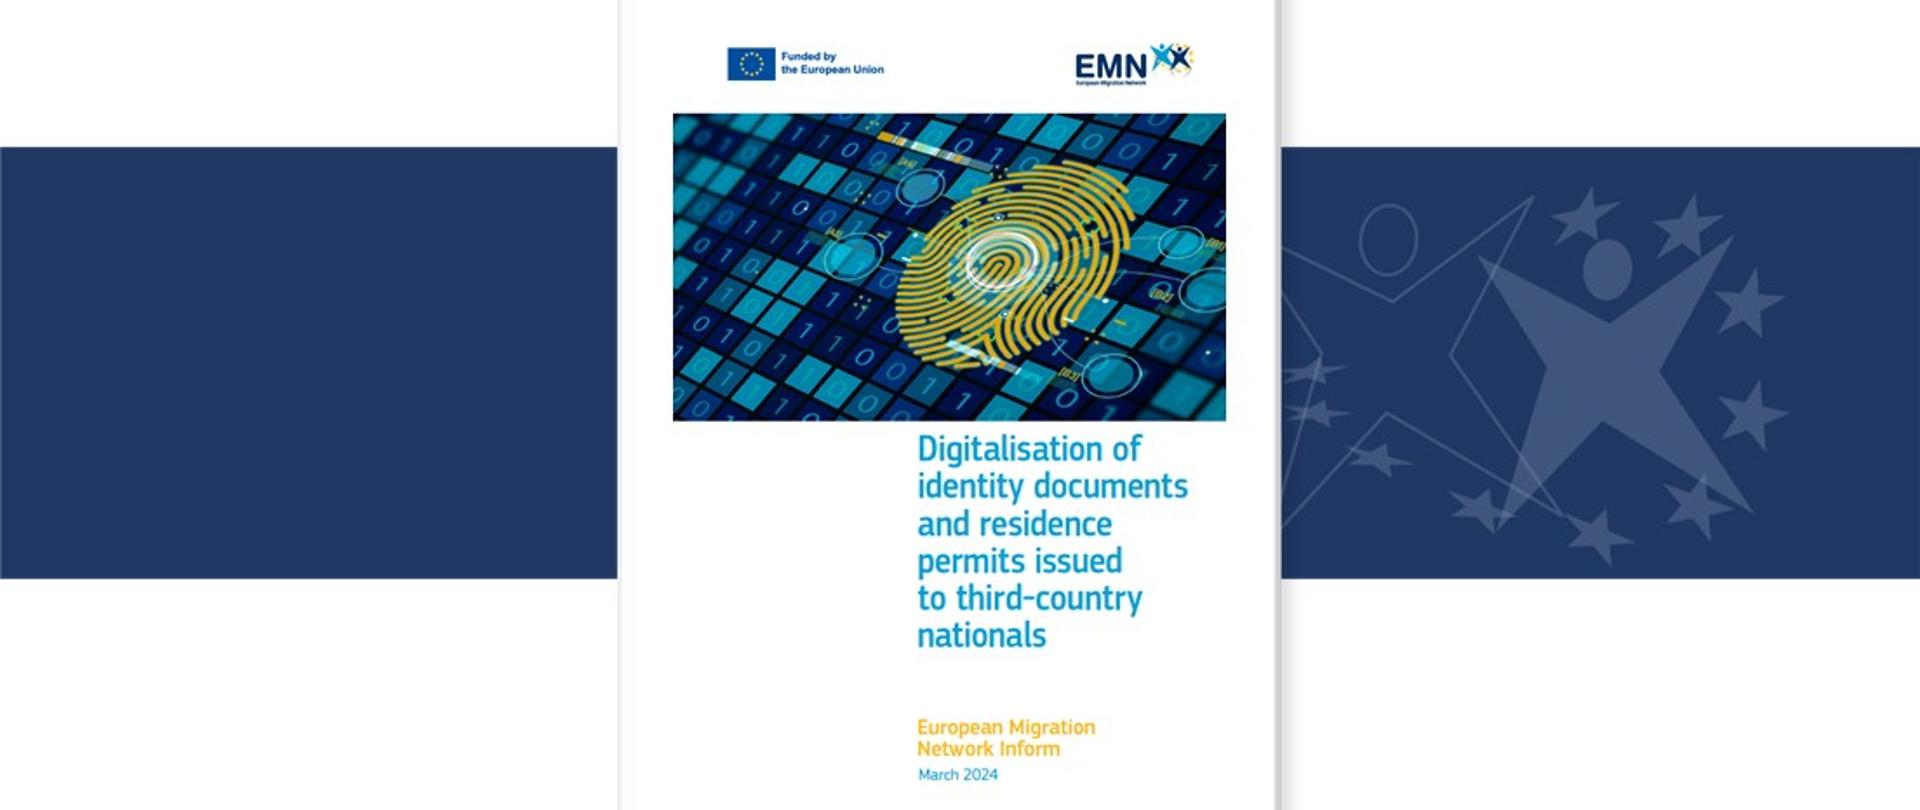 EMN Inform "Digitalisation of identity documents and residence permits issued to third-country nationals"